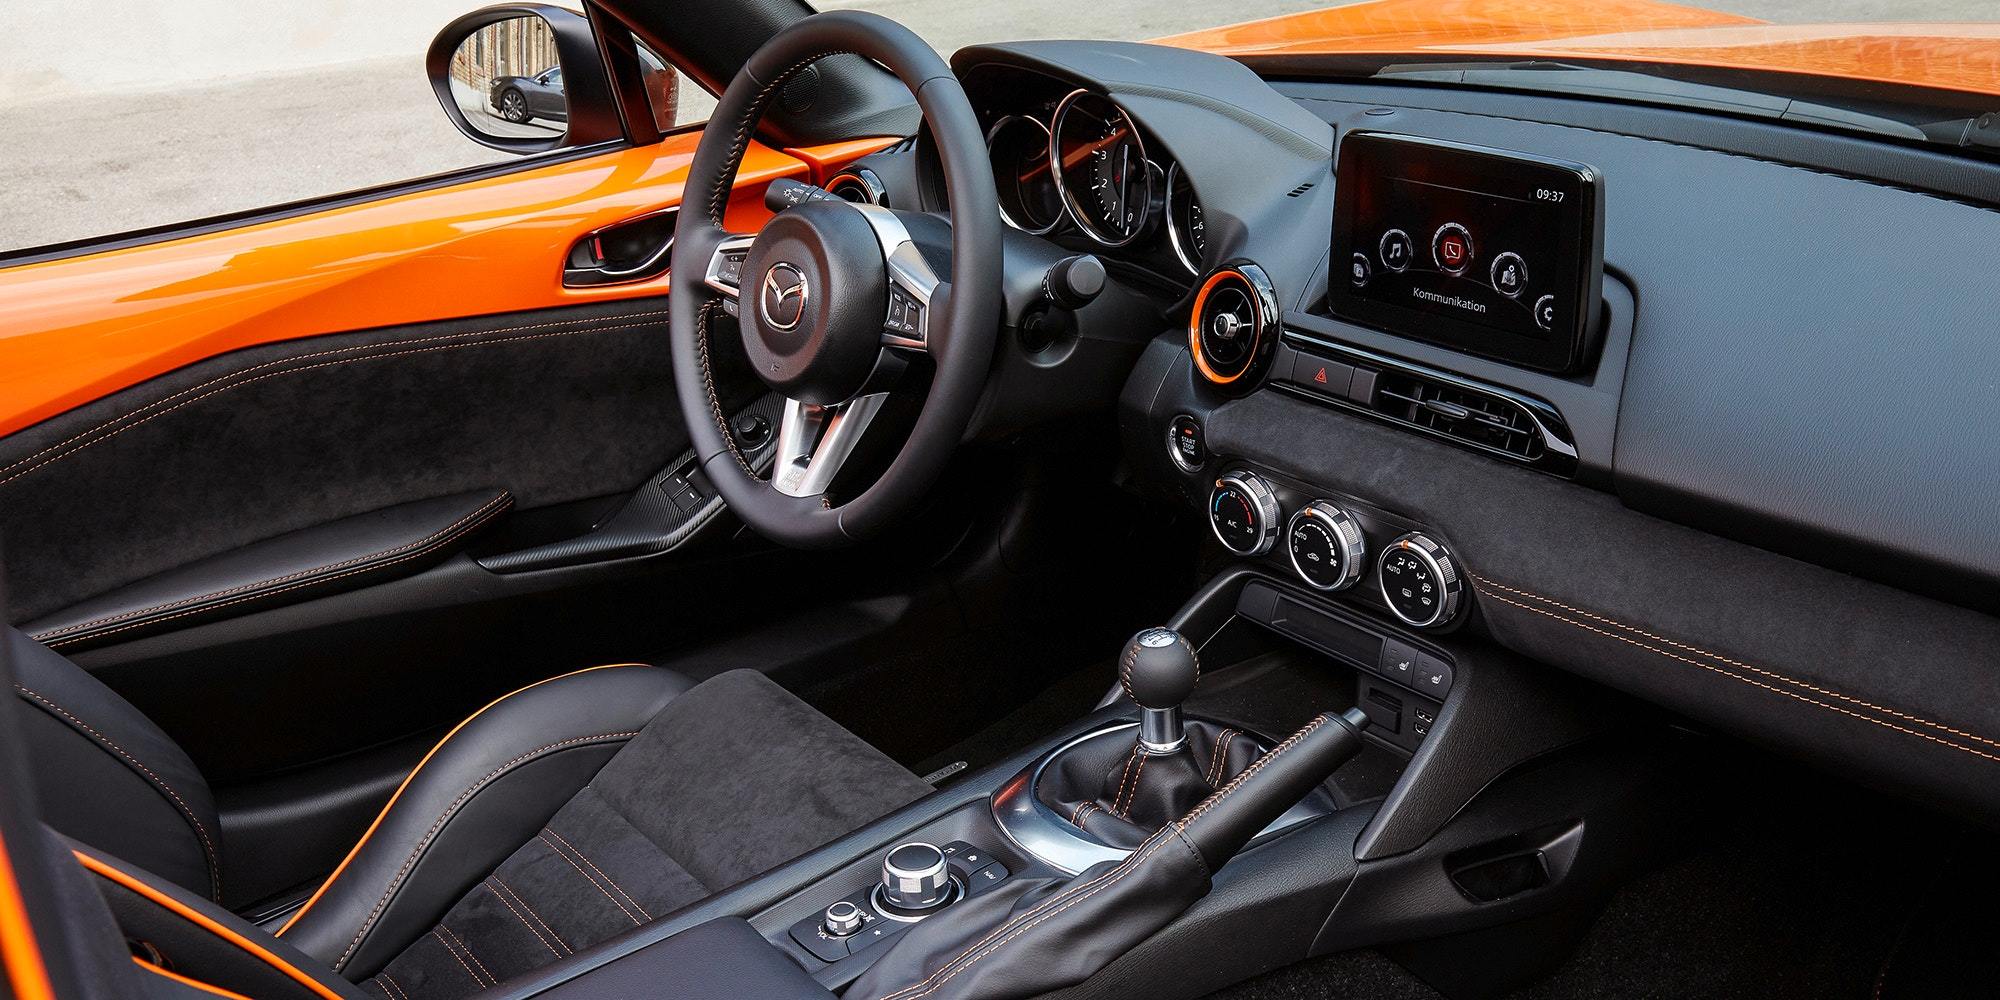 5 Ways to Make Your Car Interior Look Luxurious